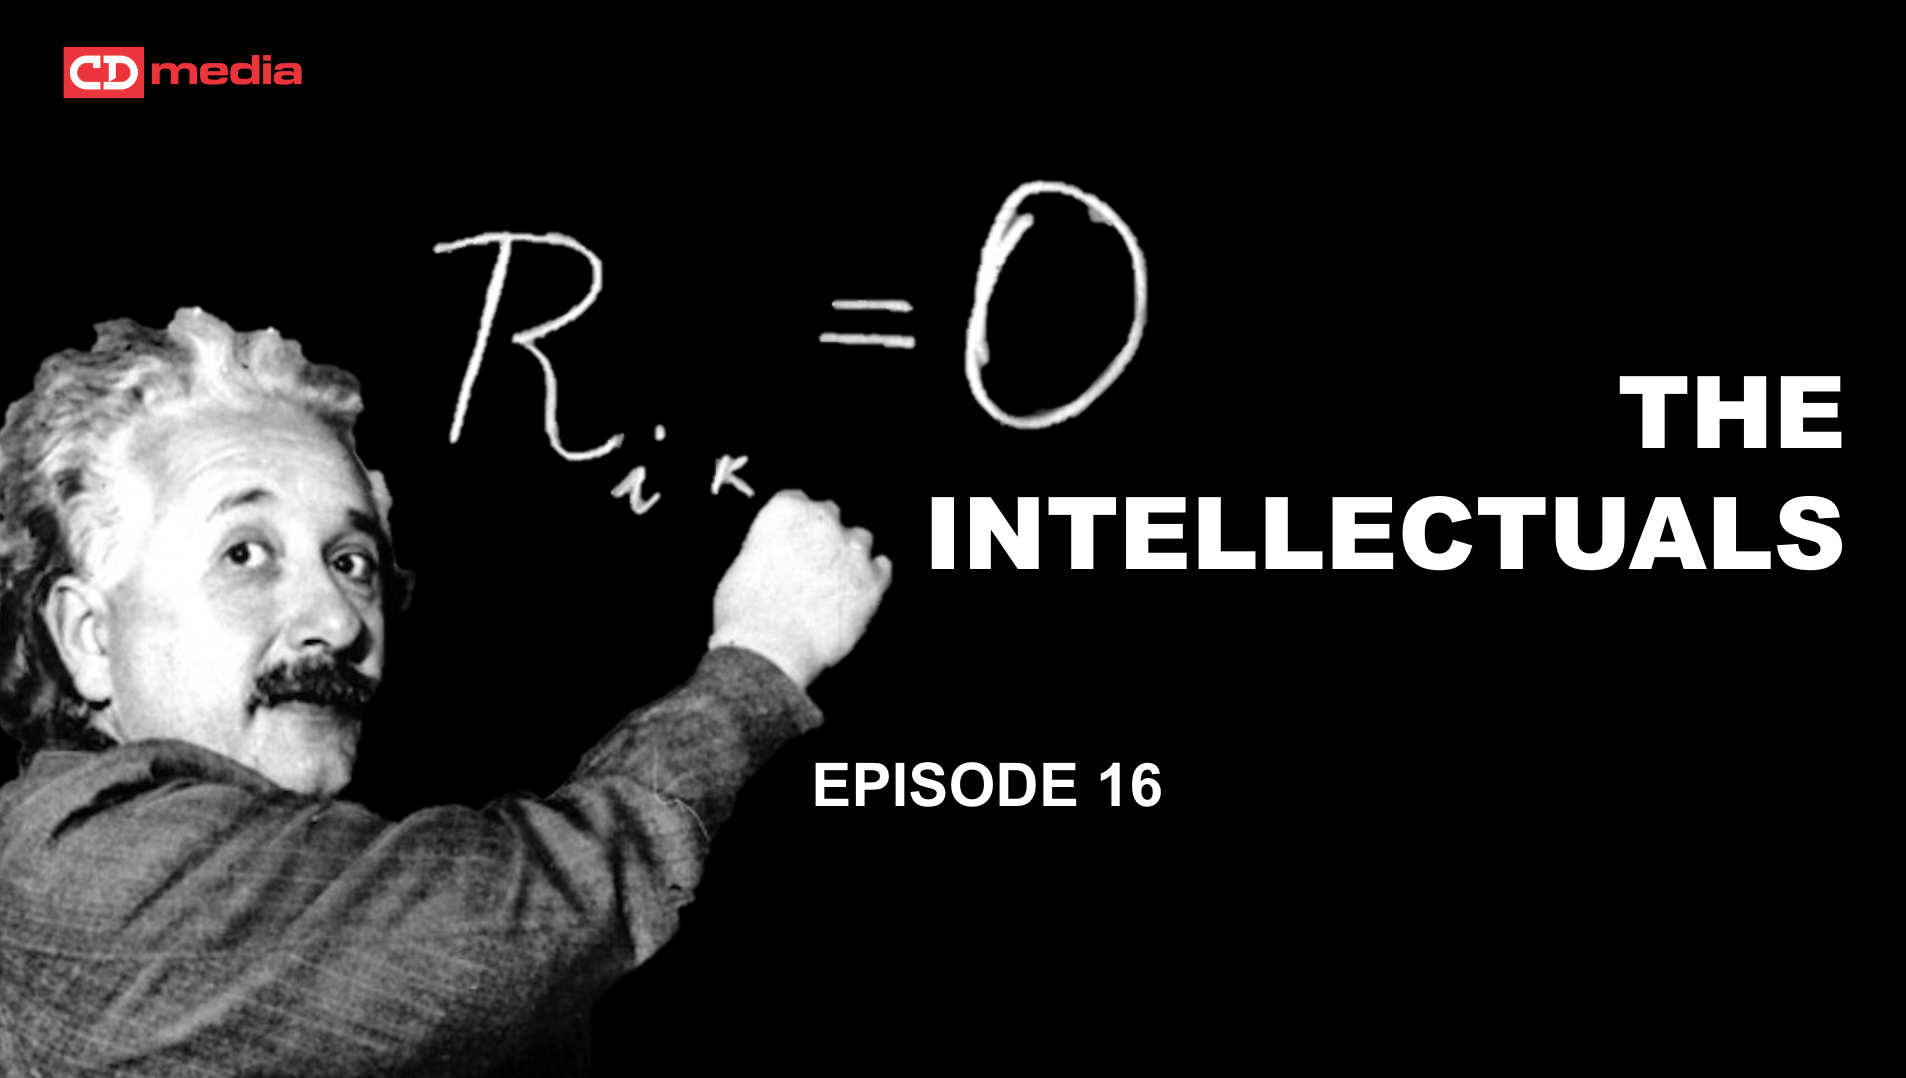 Episode 16 - The Intellectuals - Tracey Meck